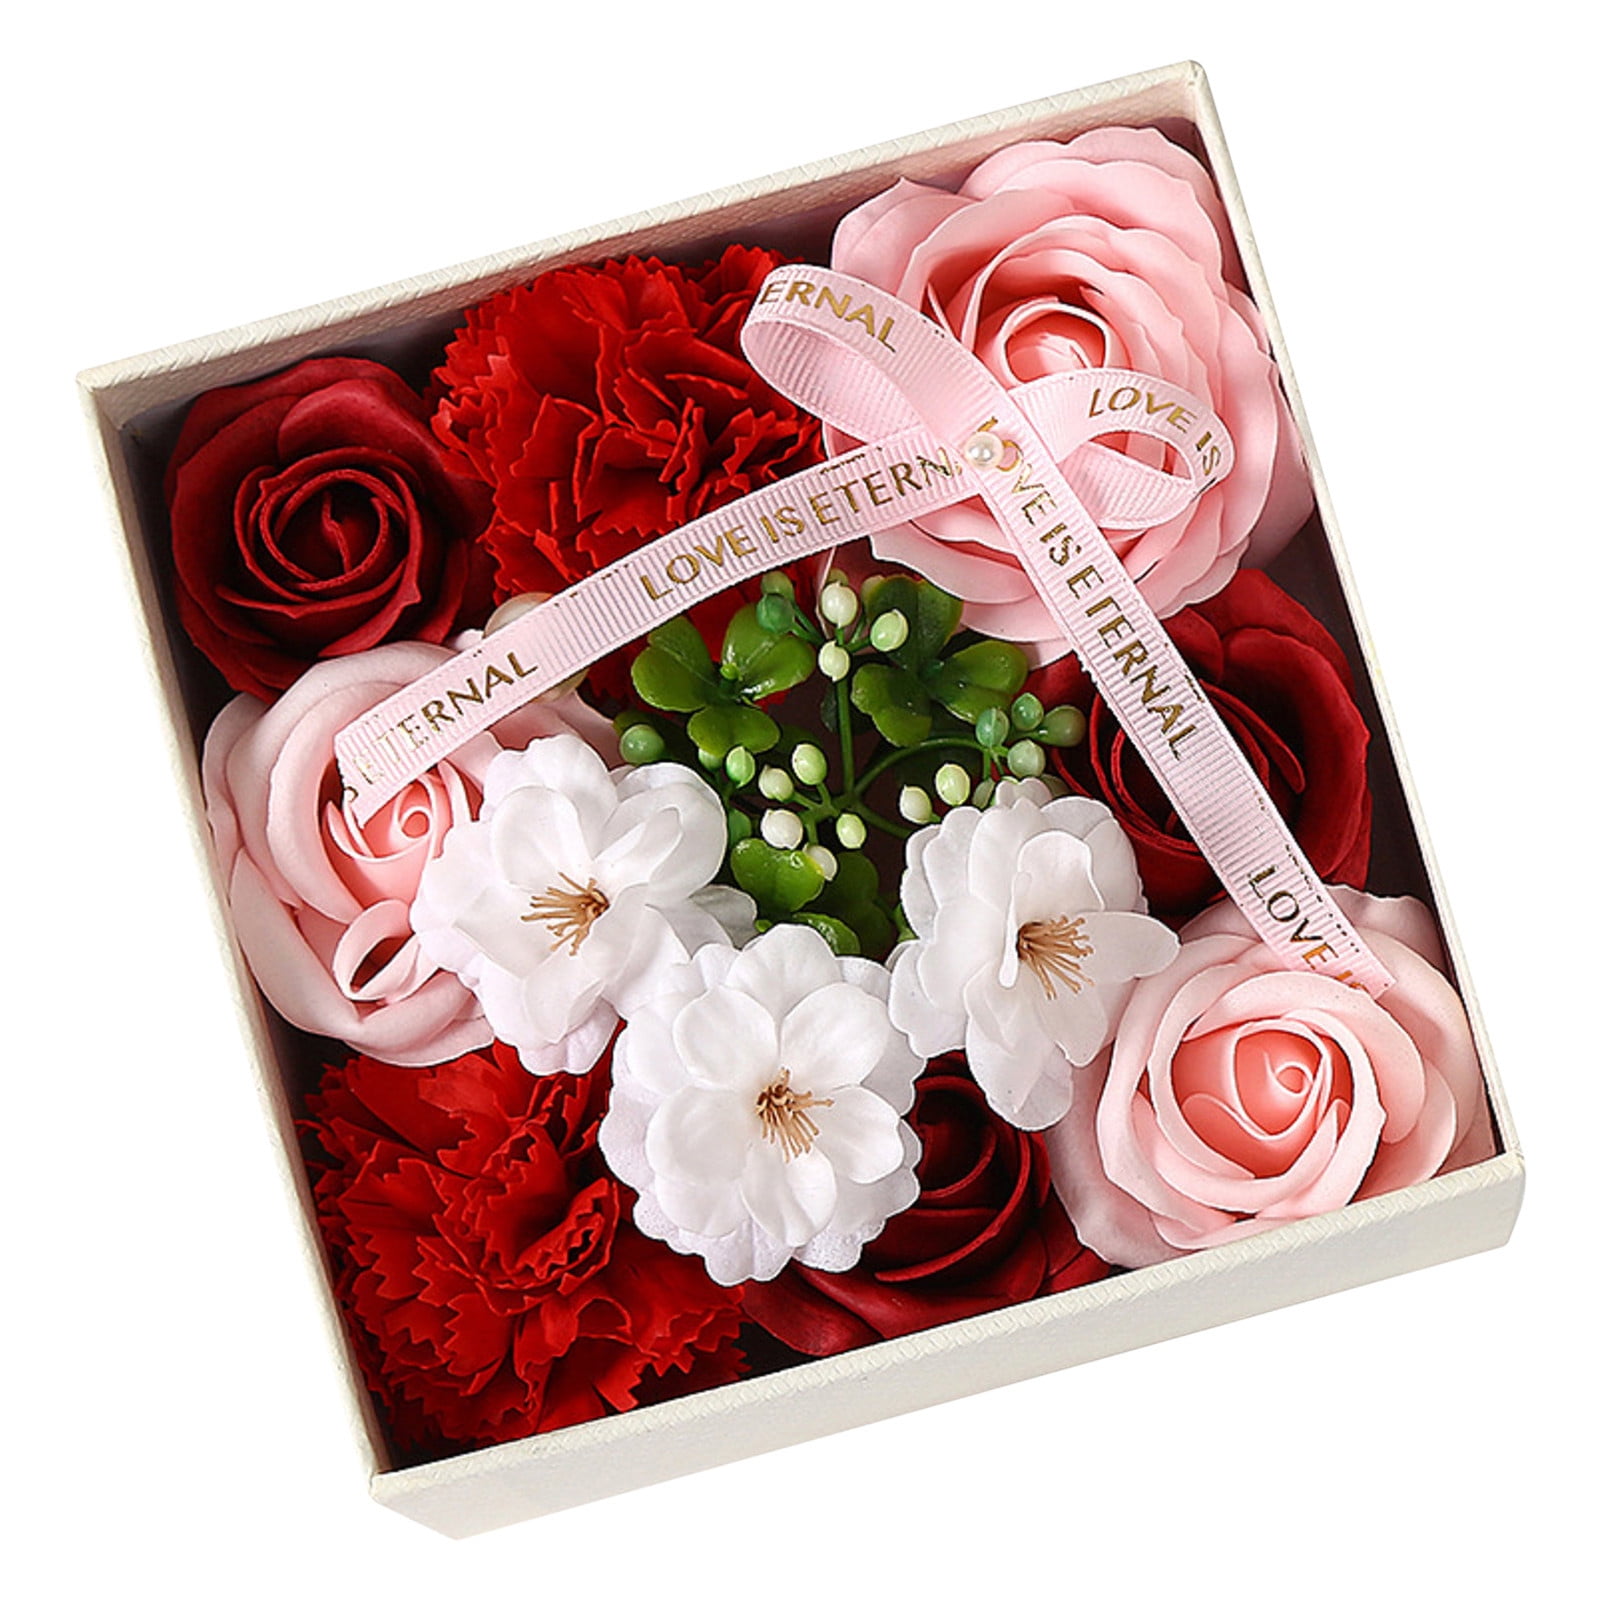 81Pcs/Box Rose Bath Soap Flower Petal With Box For Wedding Valentine's Day Gife 